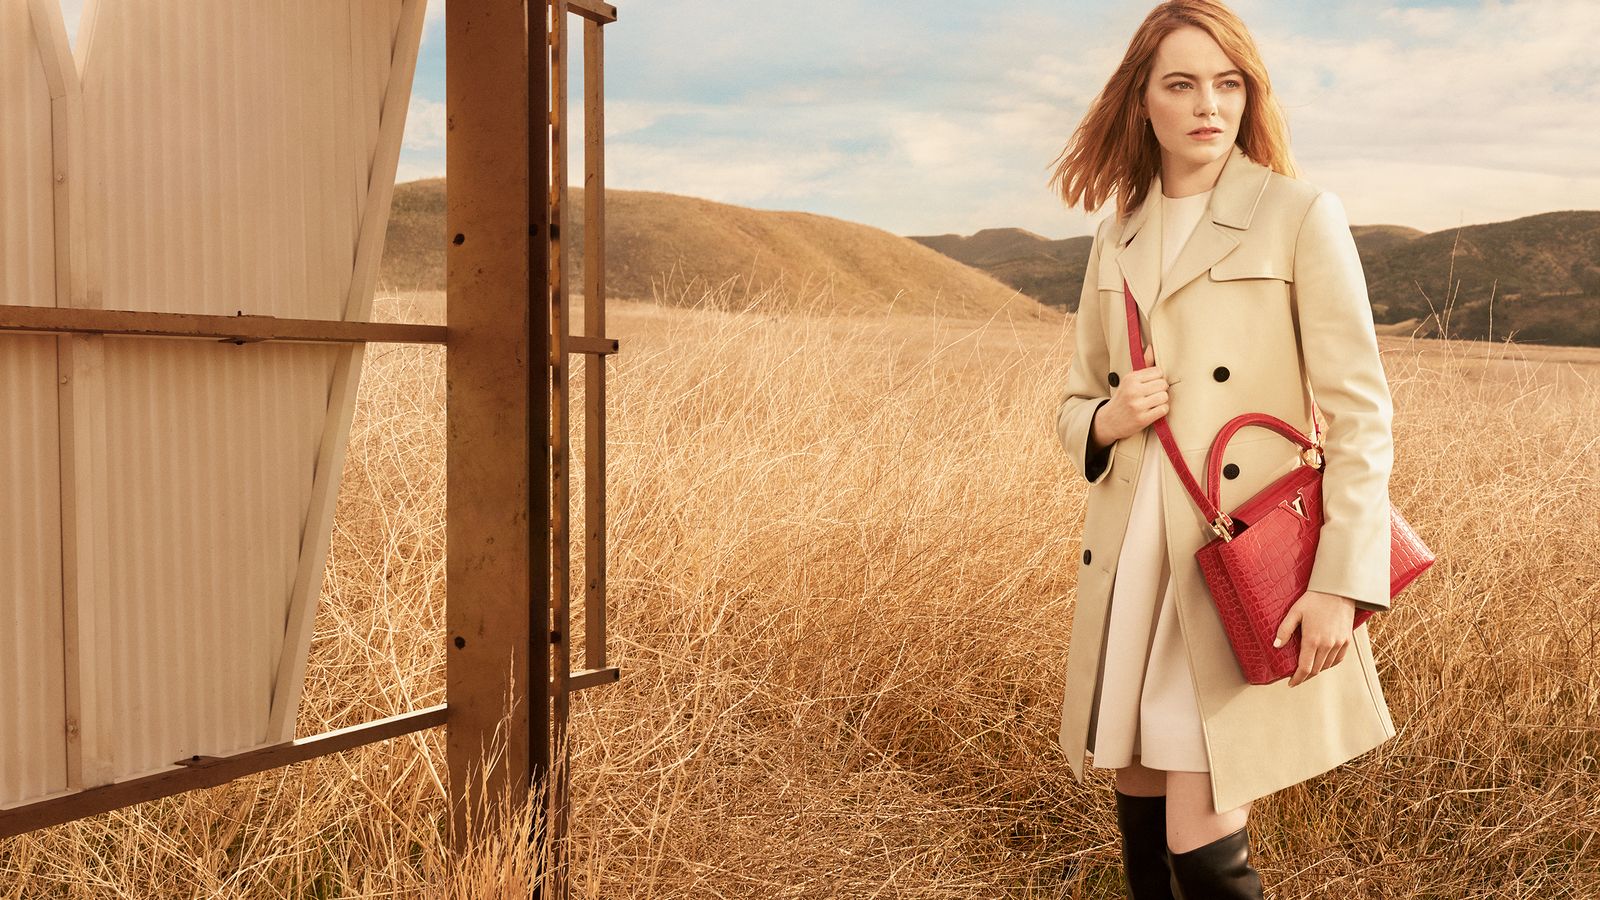 Louis Vuitton's Spirit of Travel campaign starring Emma